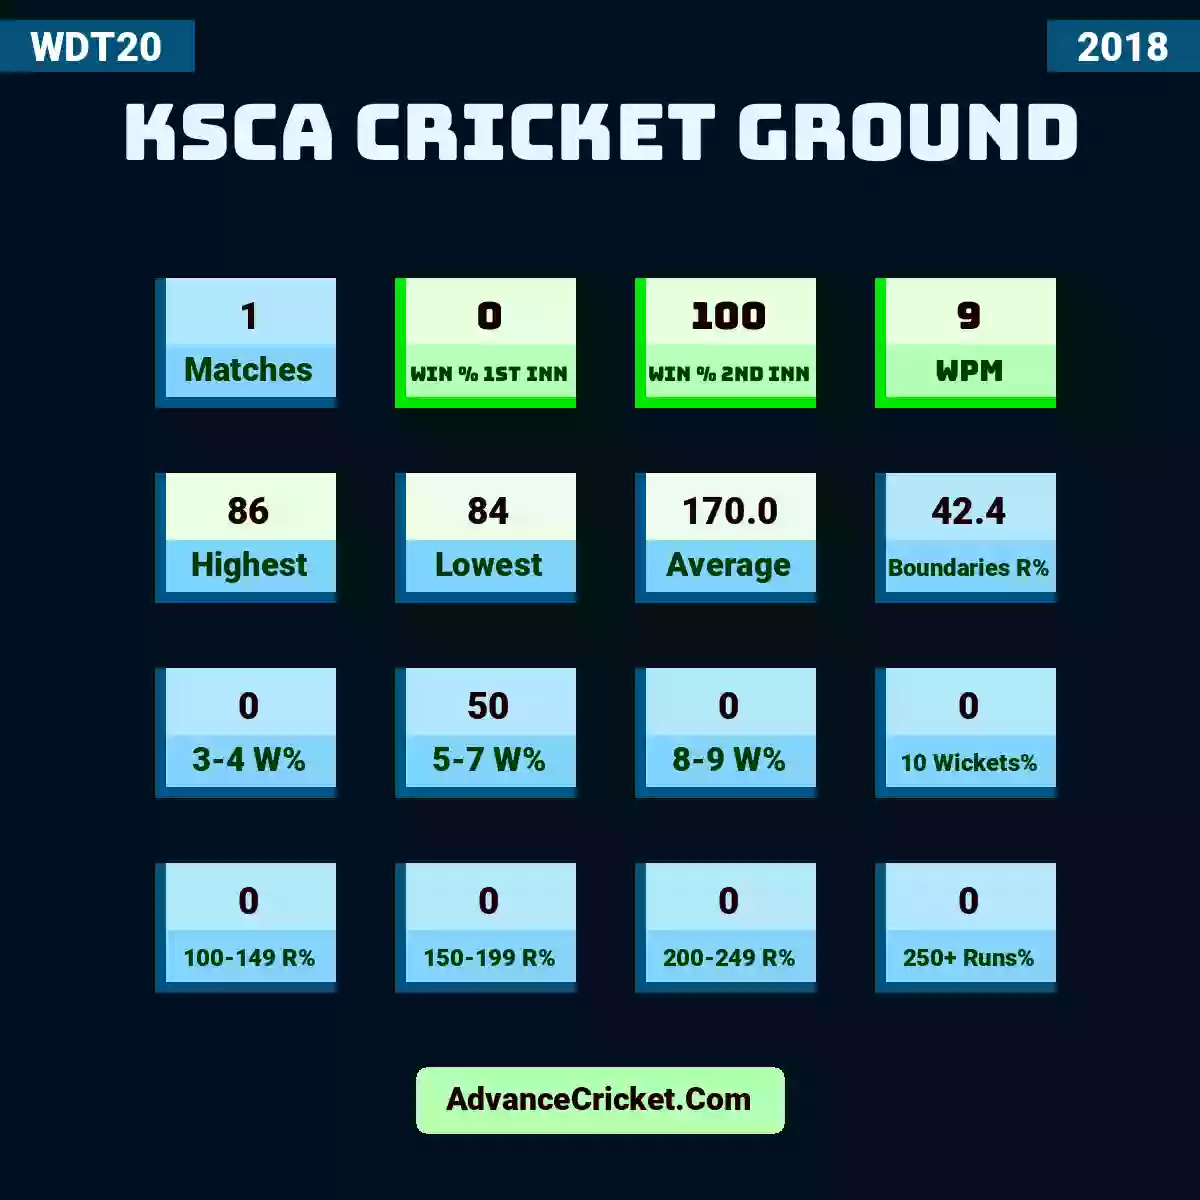 Image showing KSCA Cricket Ground with Matches: 1, Win % 1st Inn: 0, Win % 2nd Inn: 100, WPM: 9, Highest: 86, Lowest: 84, Average: 170.0, Boundaries R%: 42.4, 3-4 W%: 0, 5-7 W%: 50, 8-9 W%: 0, 10 Wickets%: 0, 100-149 R%: 0, 150-199 R%: 0, 200-249 R%: 0, 250+ Runs%: 0.